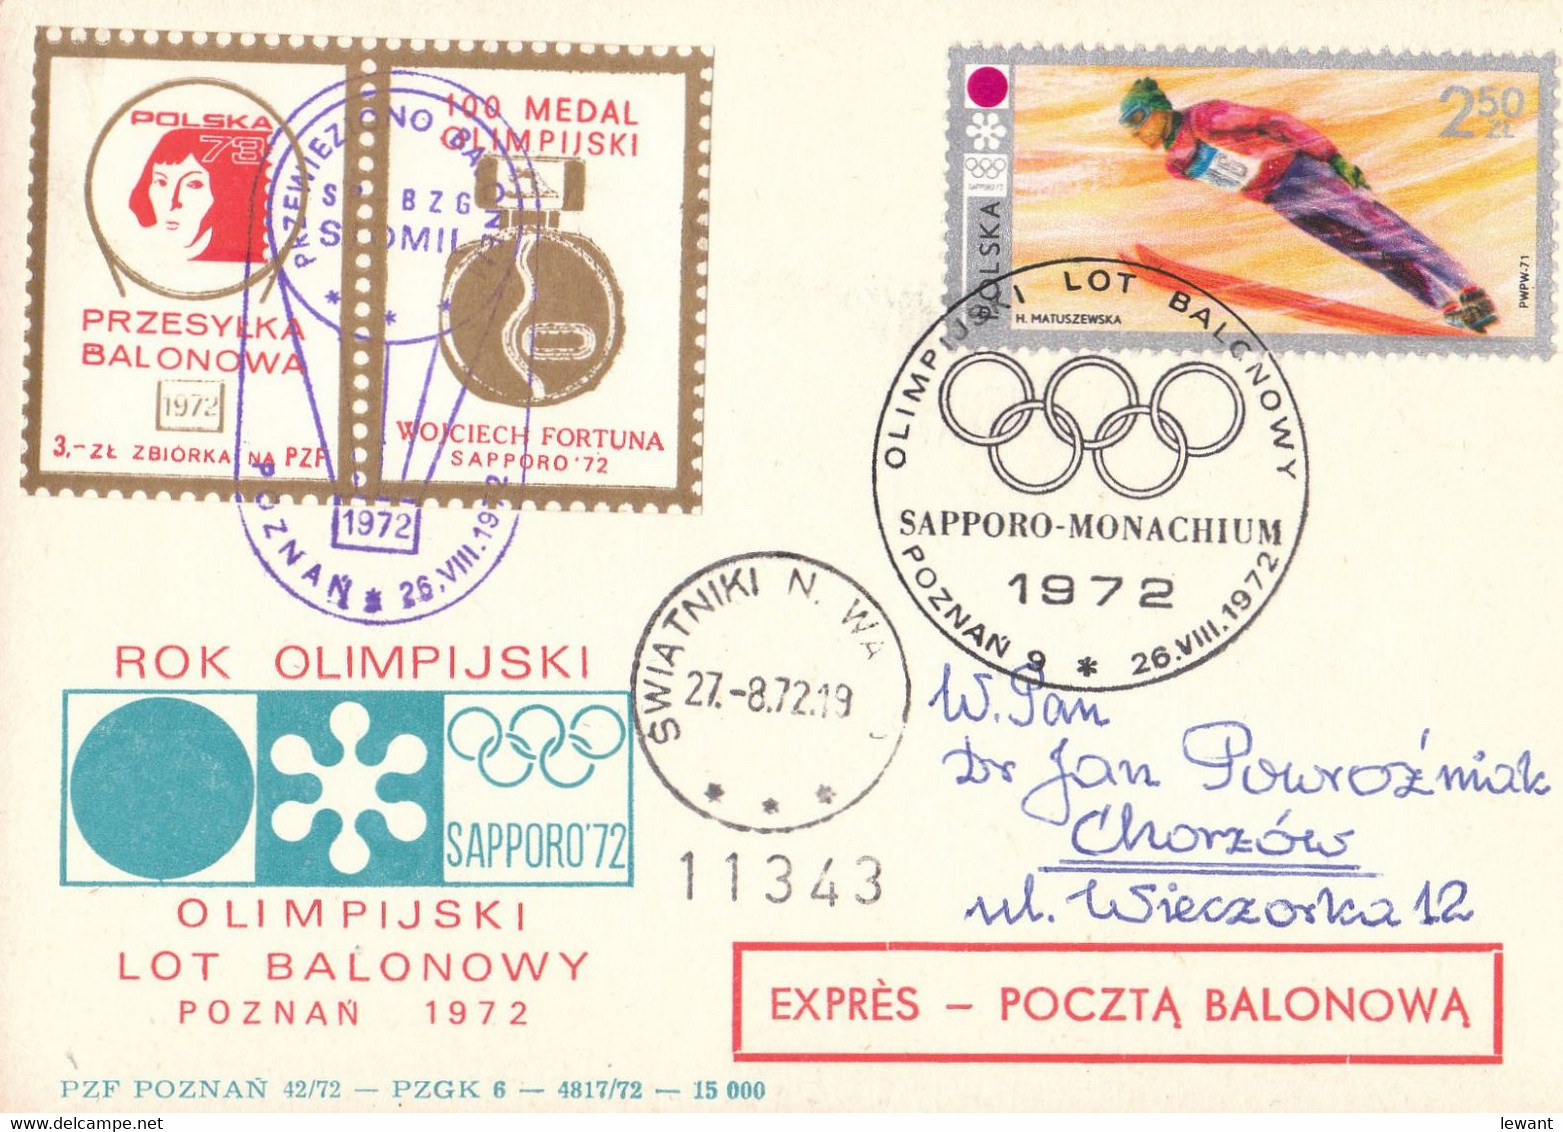 1972 ''STOMIL'' Postal Balloon With A Special Date Stamp For The Olympic Games In Sapporo And Munich (11343) POWR - Palloni